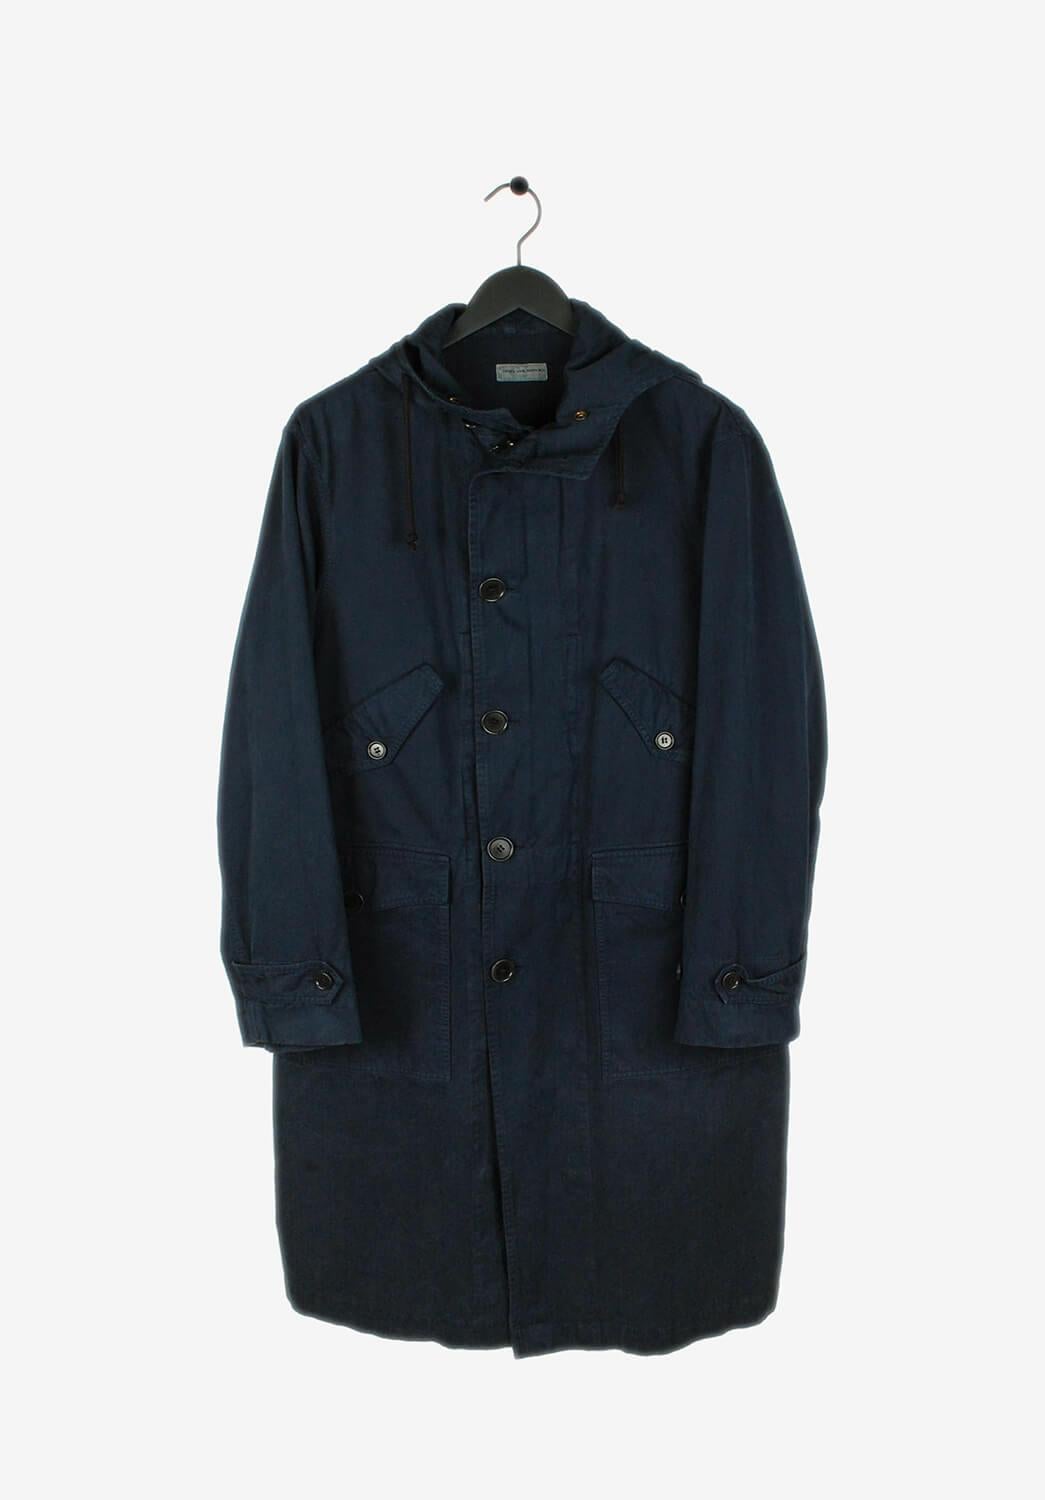 Item for sale is 100% genuine Dries Van Noten Parka
Color: Navy
(An actual color may a bit vary due to individual computer screen interpretation)
Material: 100% cotton
Tag size: L (runs L/XL)
This coat is great quality item. Rate 9 of 10, excellent